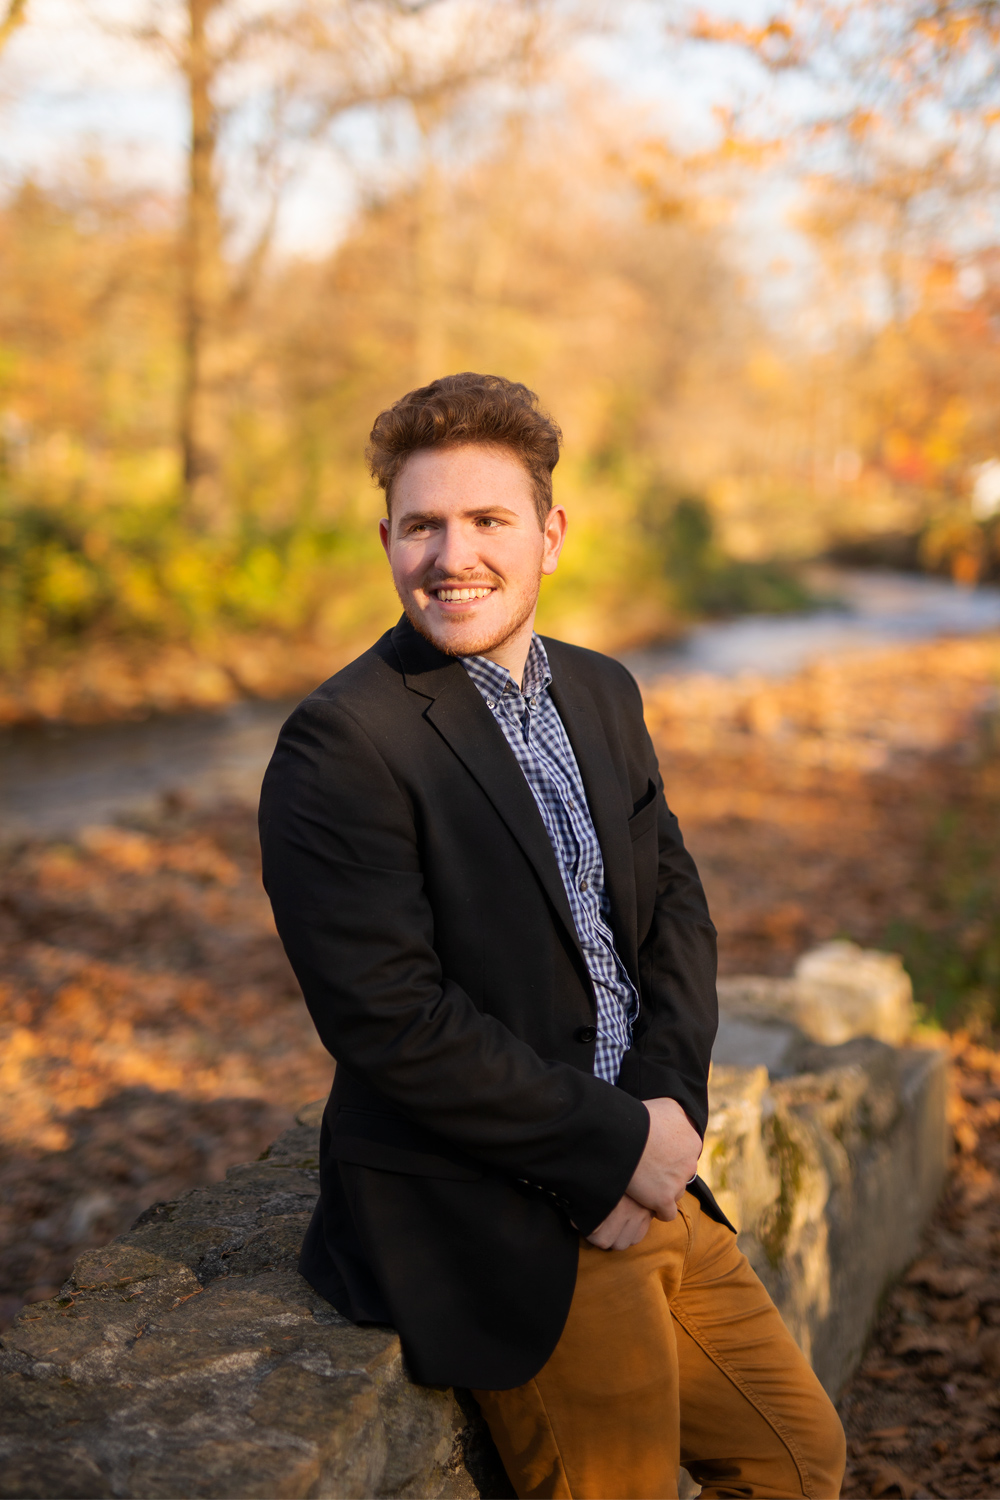 High school senior in a nice dress shirt and jacket leaning against an old stone wall. Photo captured by Dave Zerbe Photography.